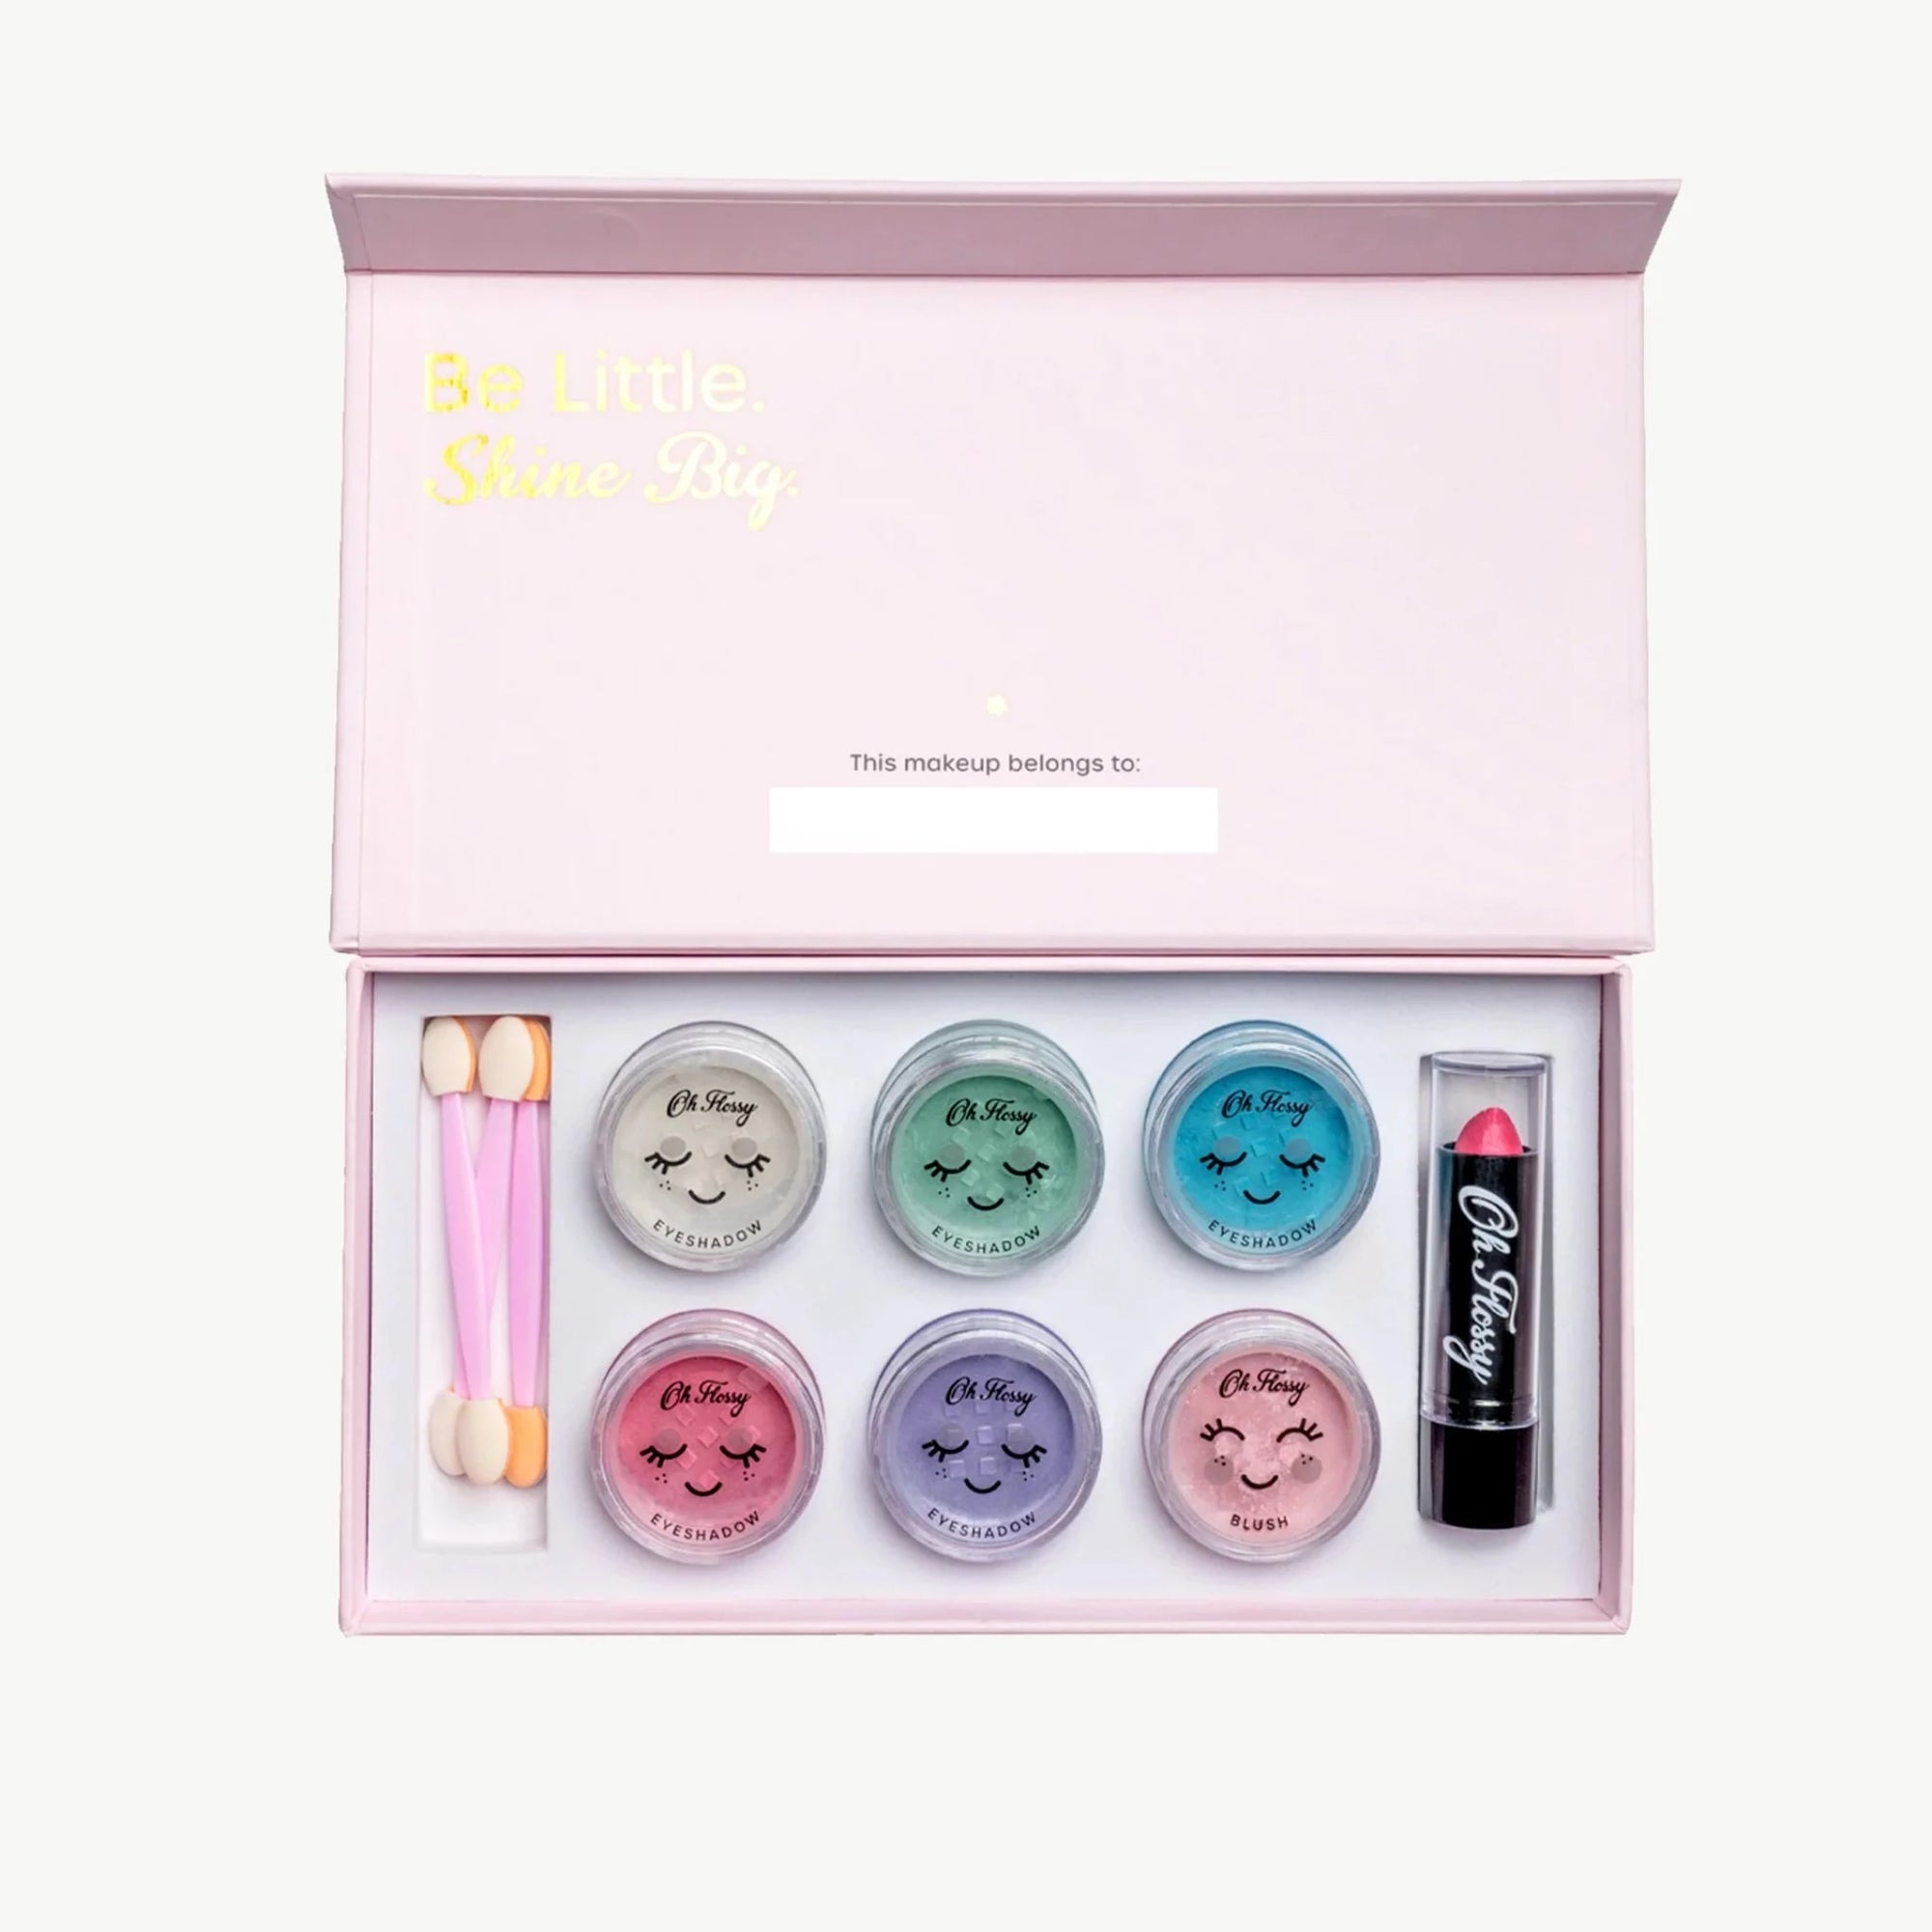 Oh Flossy Deluxe Make-up Set